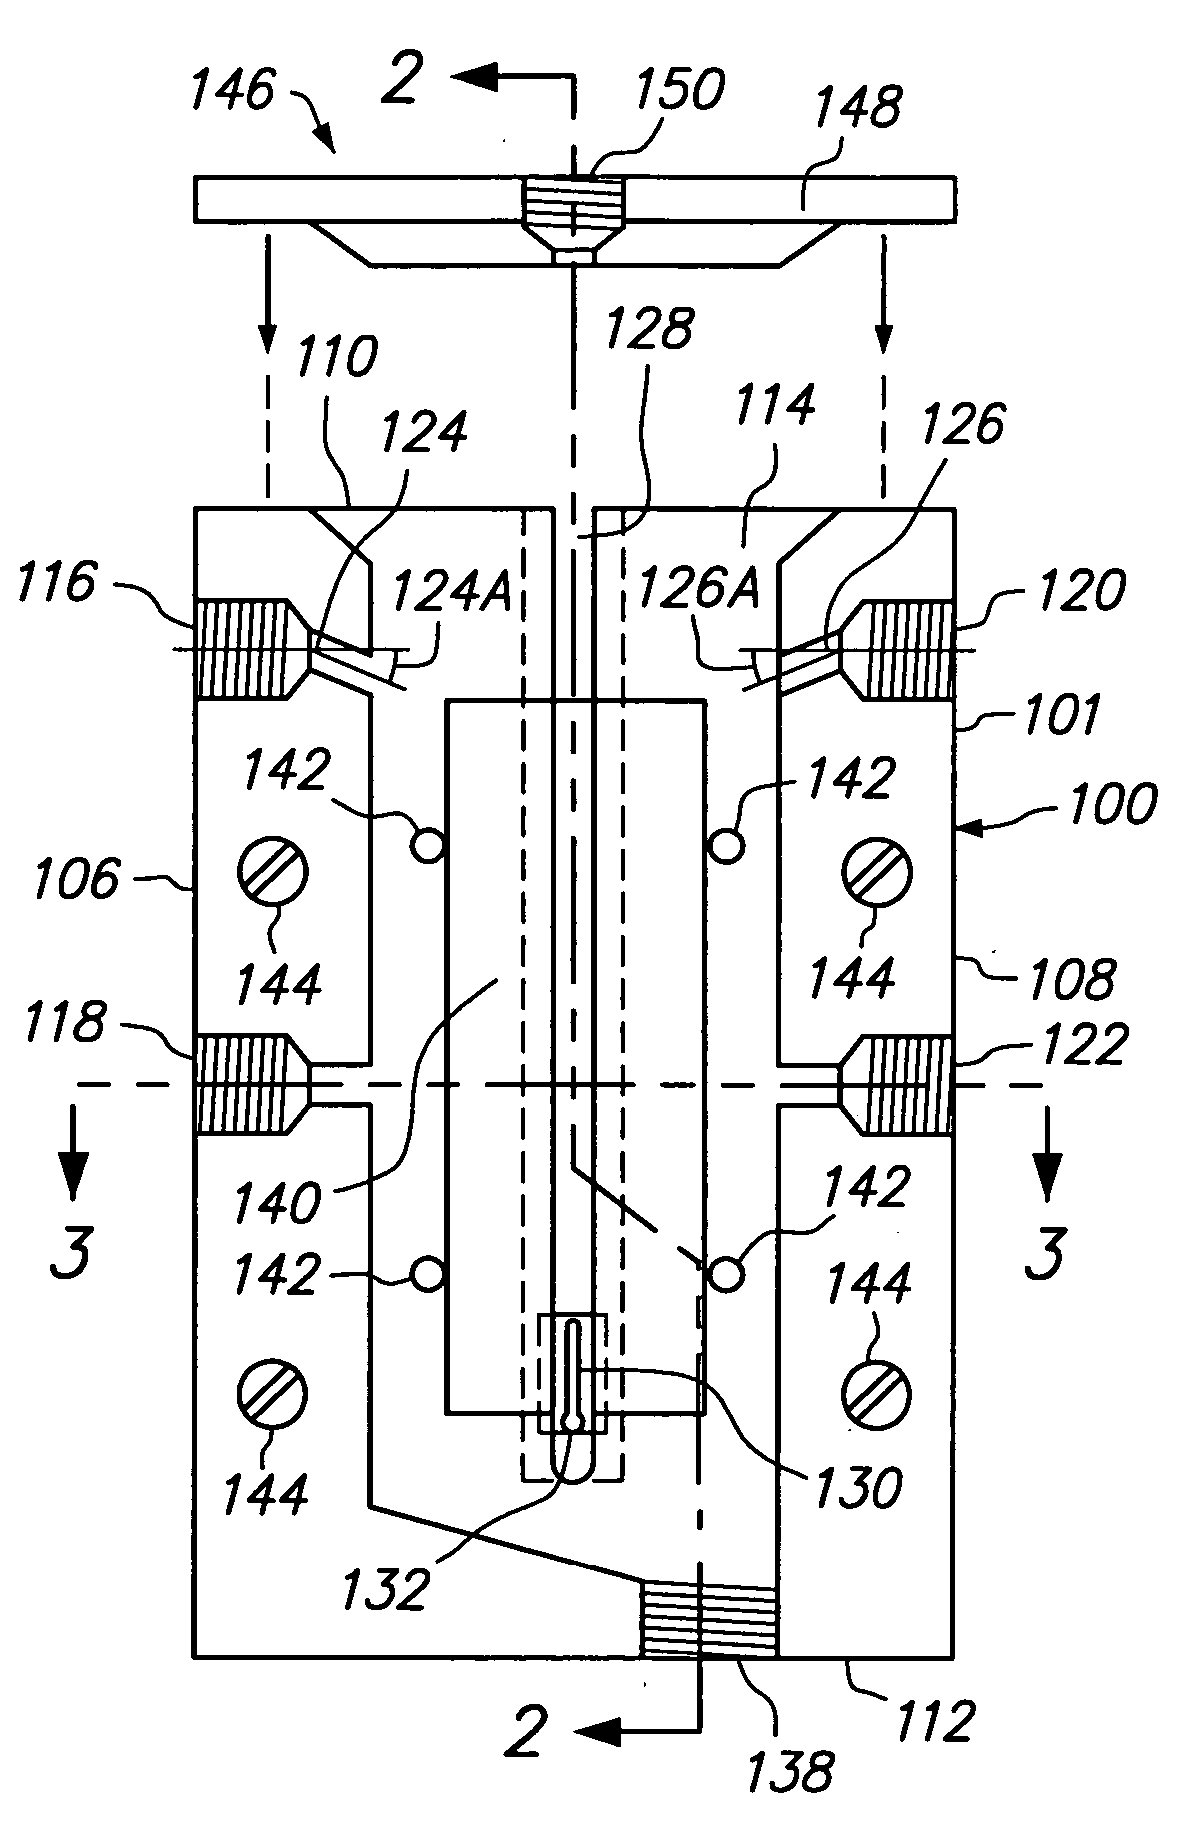 Apparatus for substrate handling